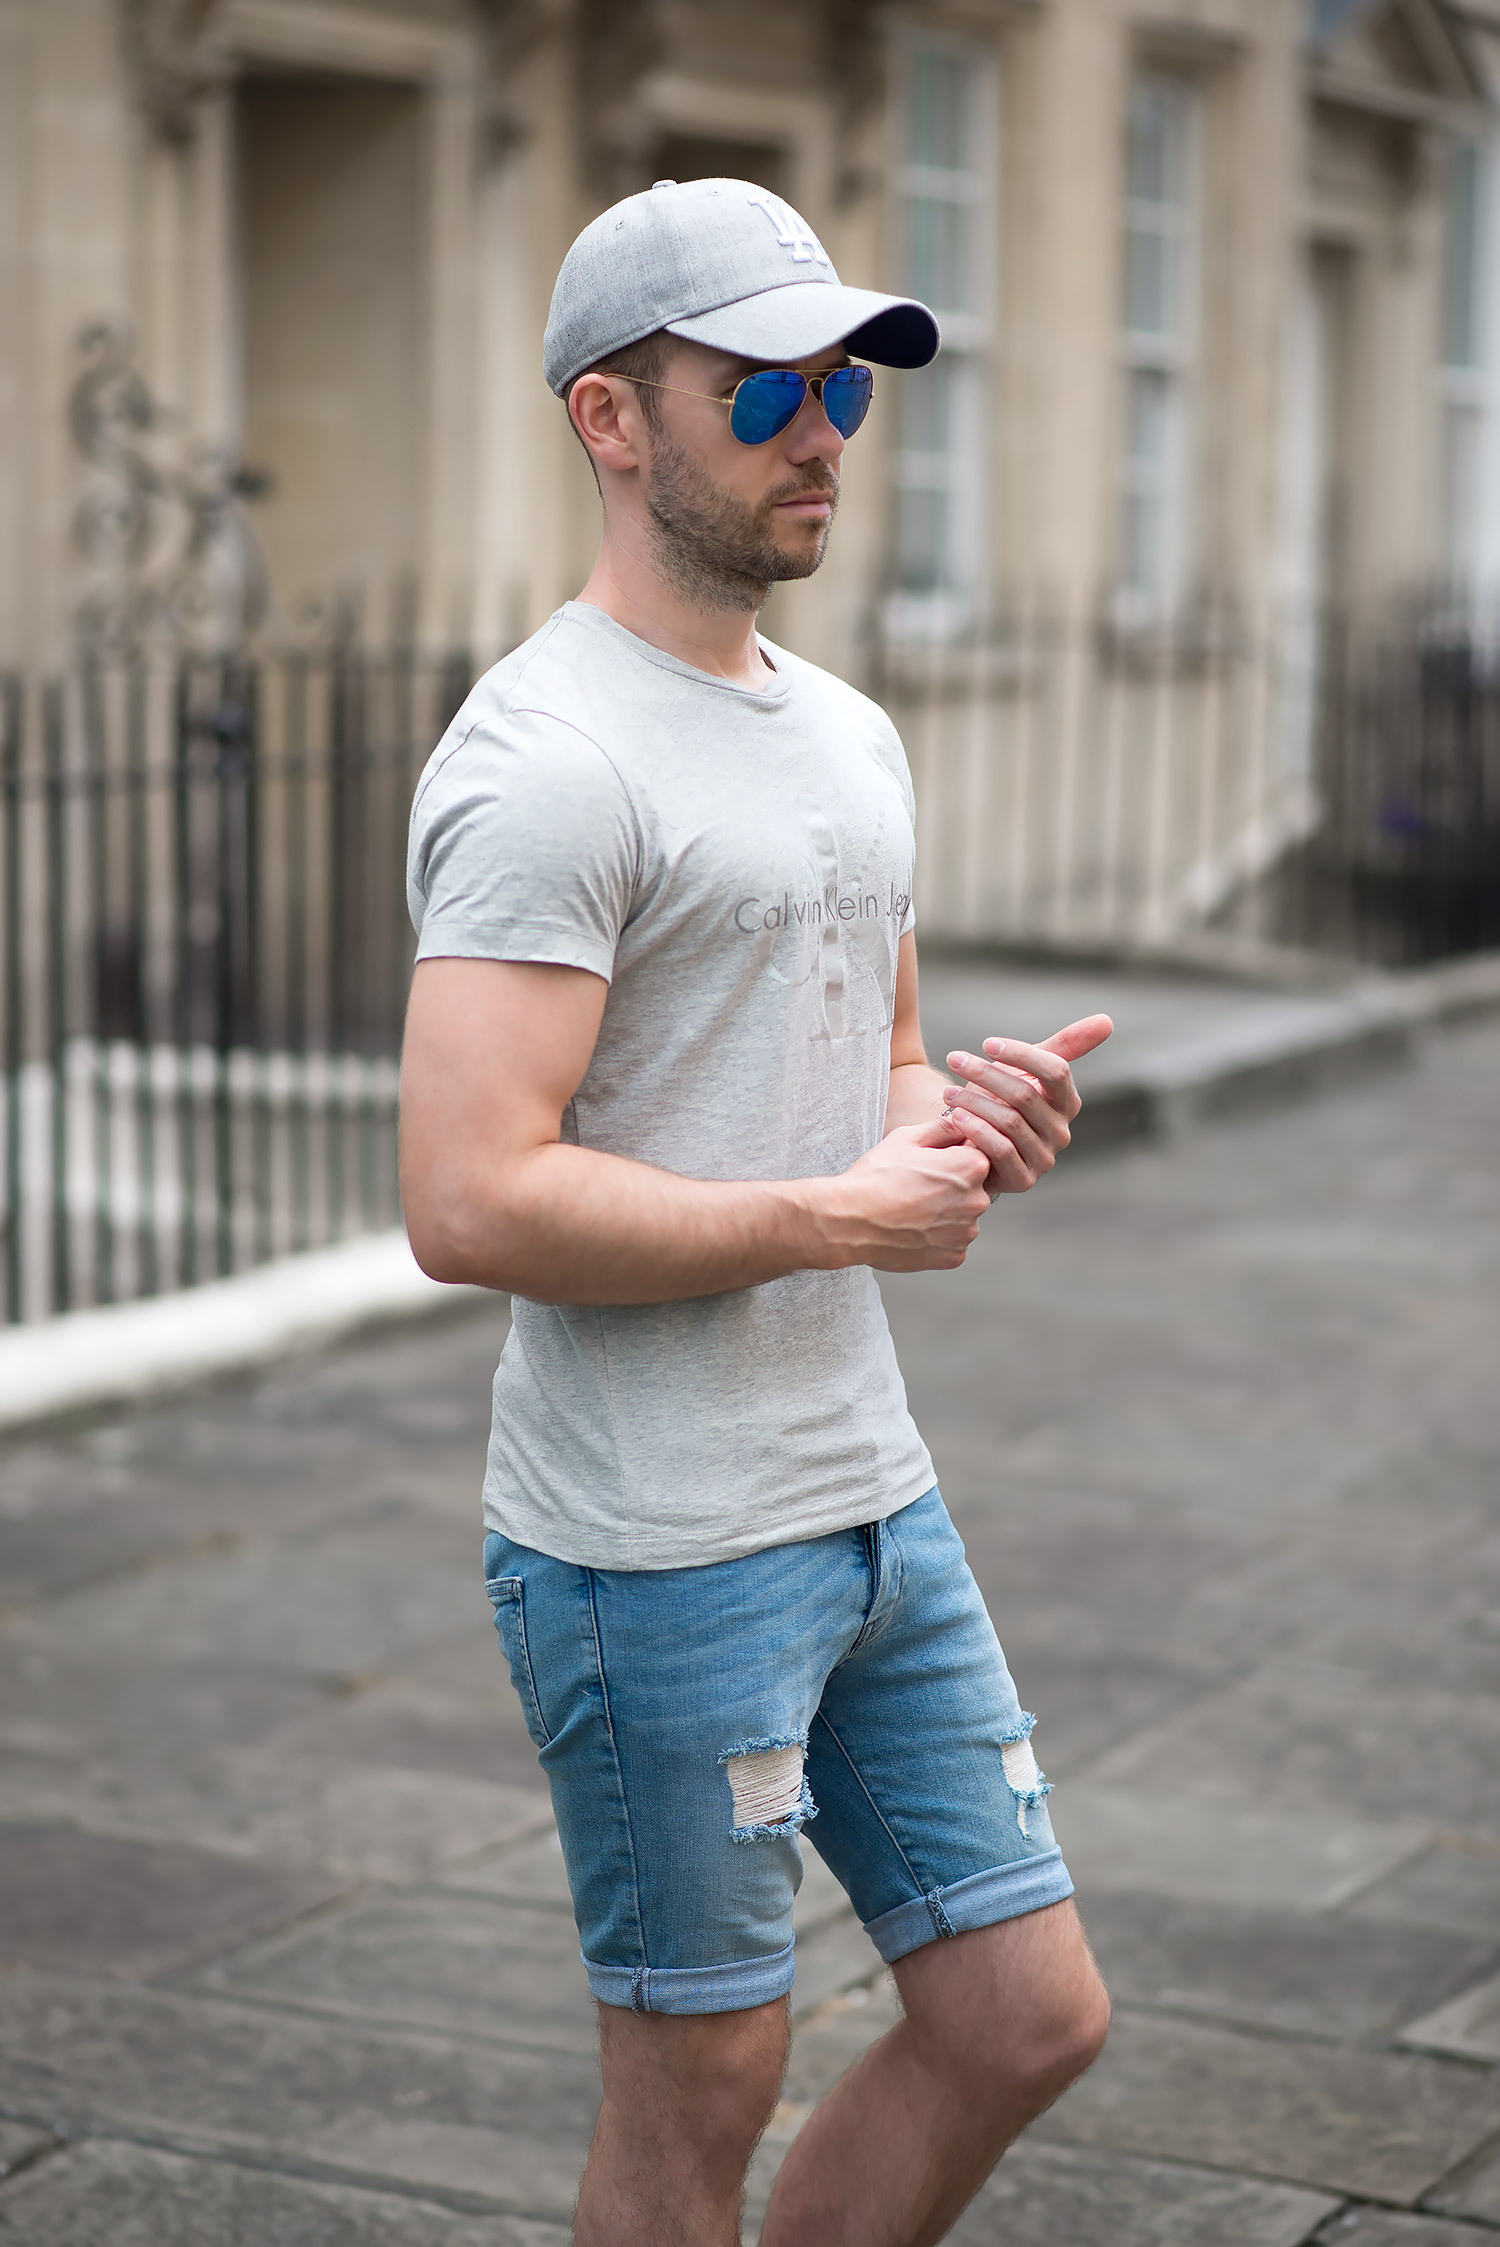 Calvin Klein T Shirt And Topman Skinny Denim Shorts Outfit - Your ...